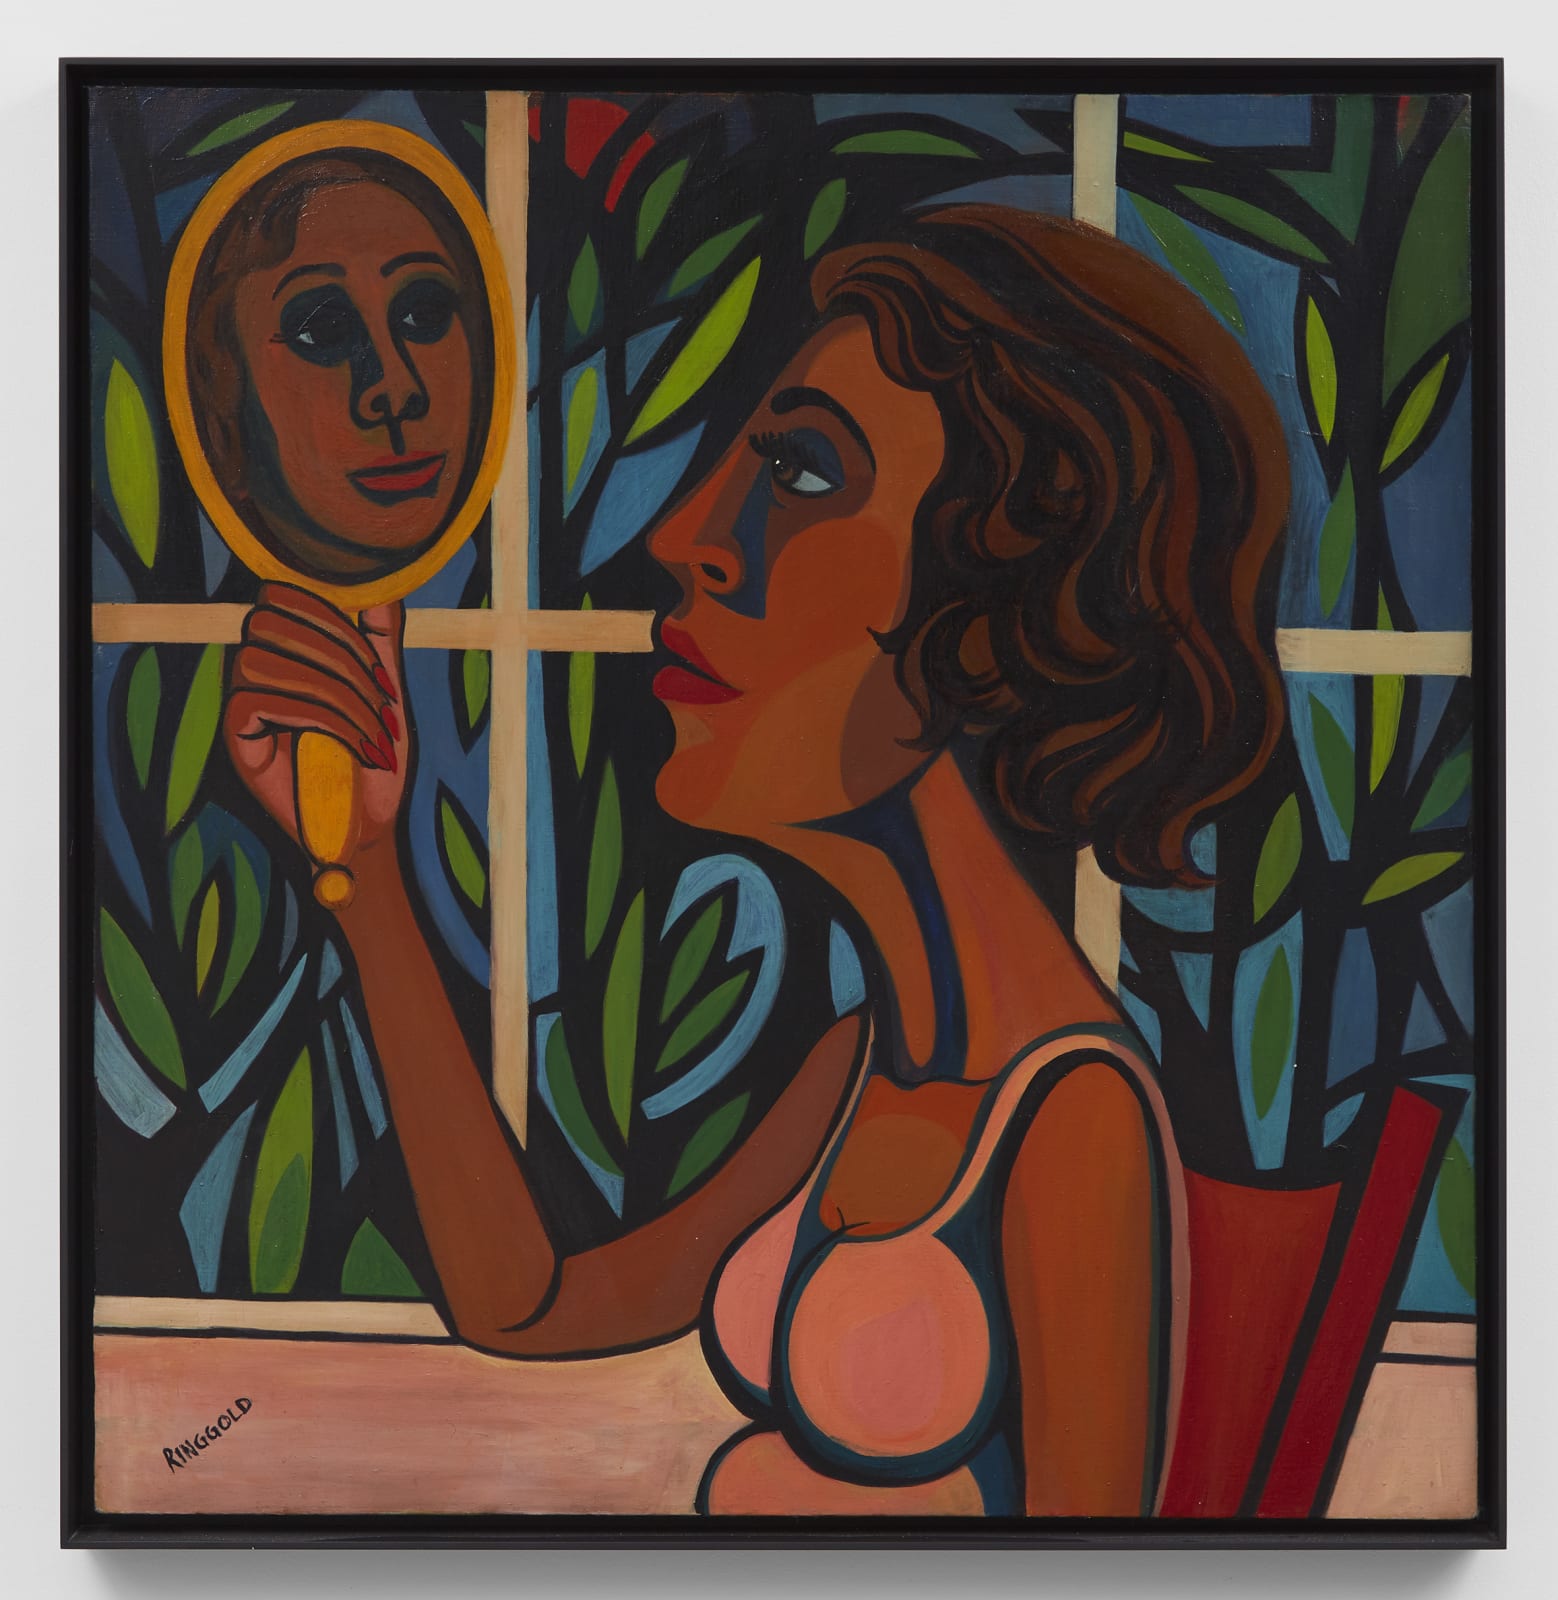 Faith Ringgold, American People Series #16: Woman Looking in a Mirror, 1966